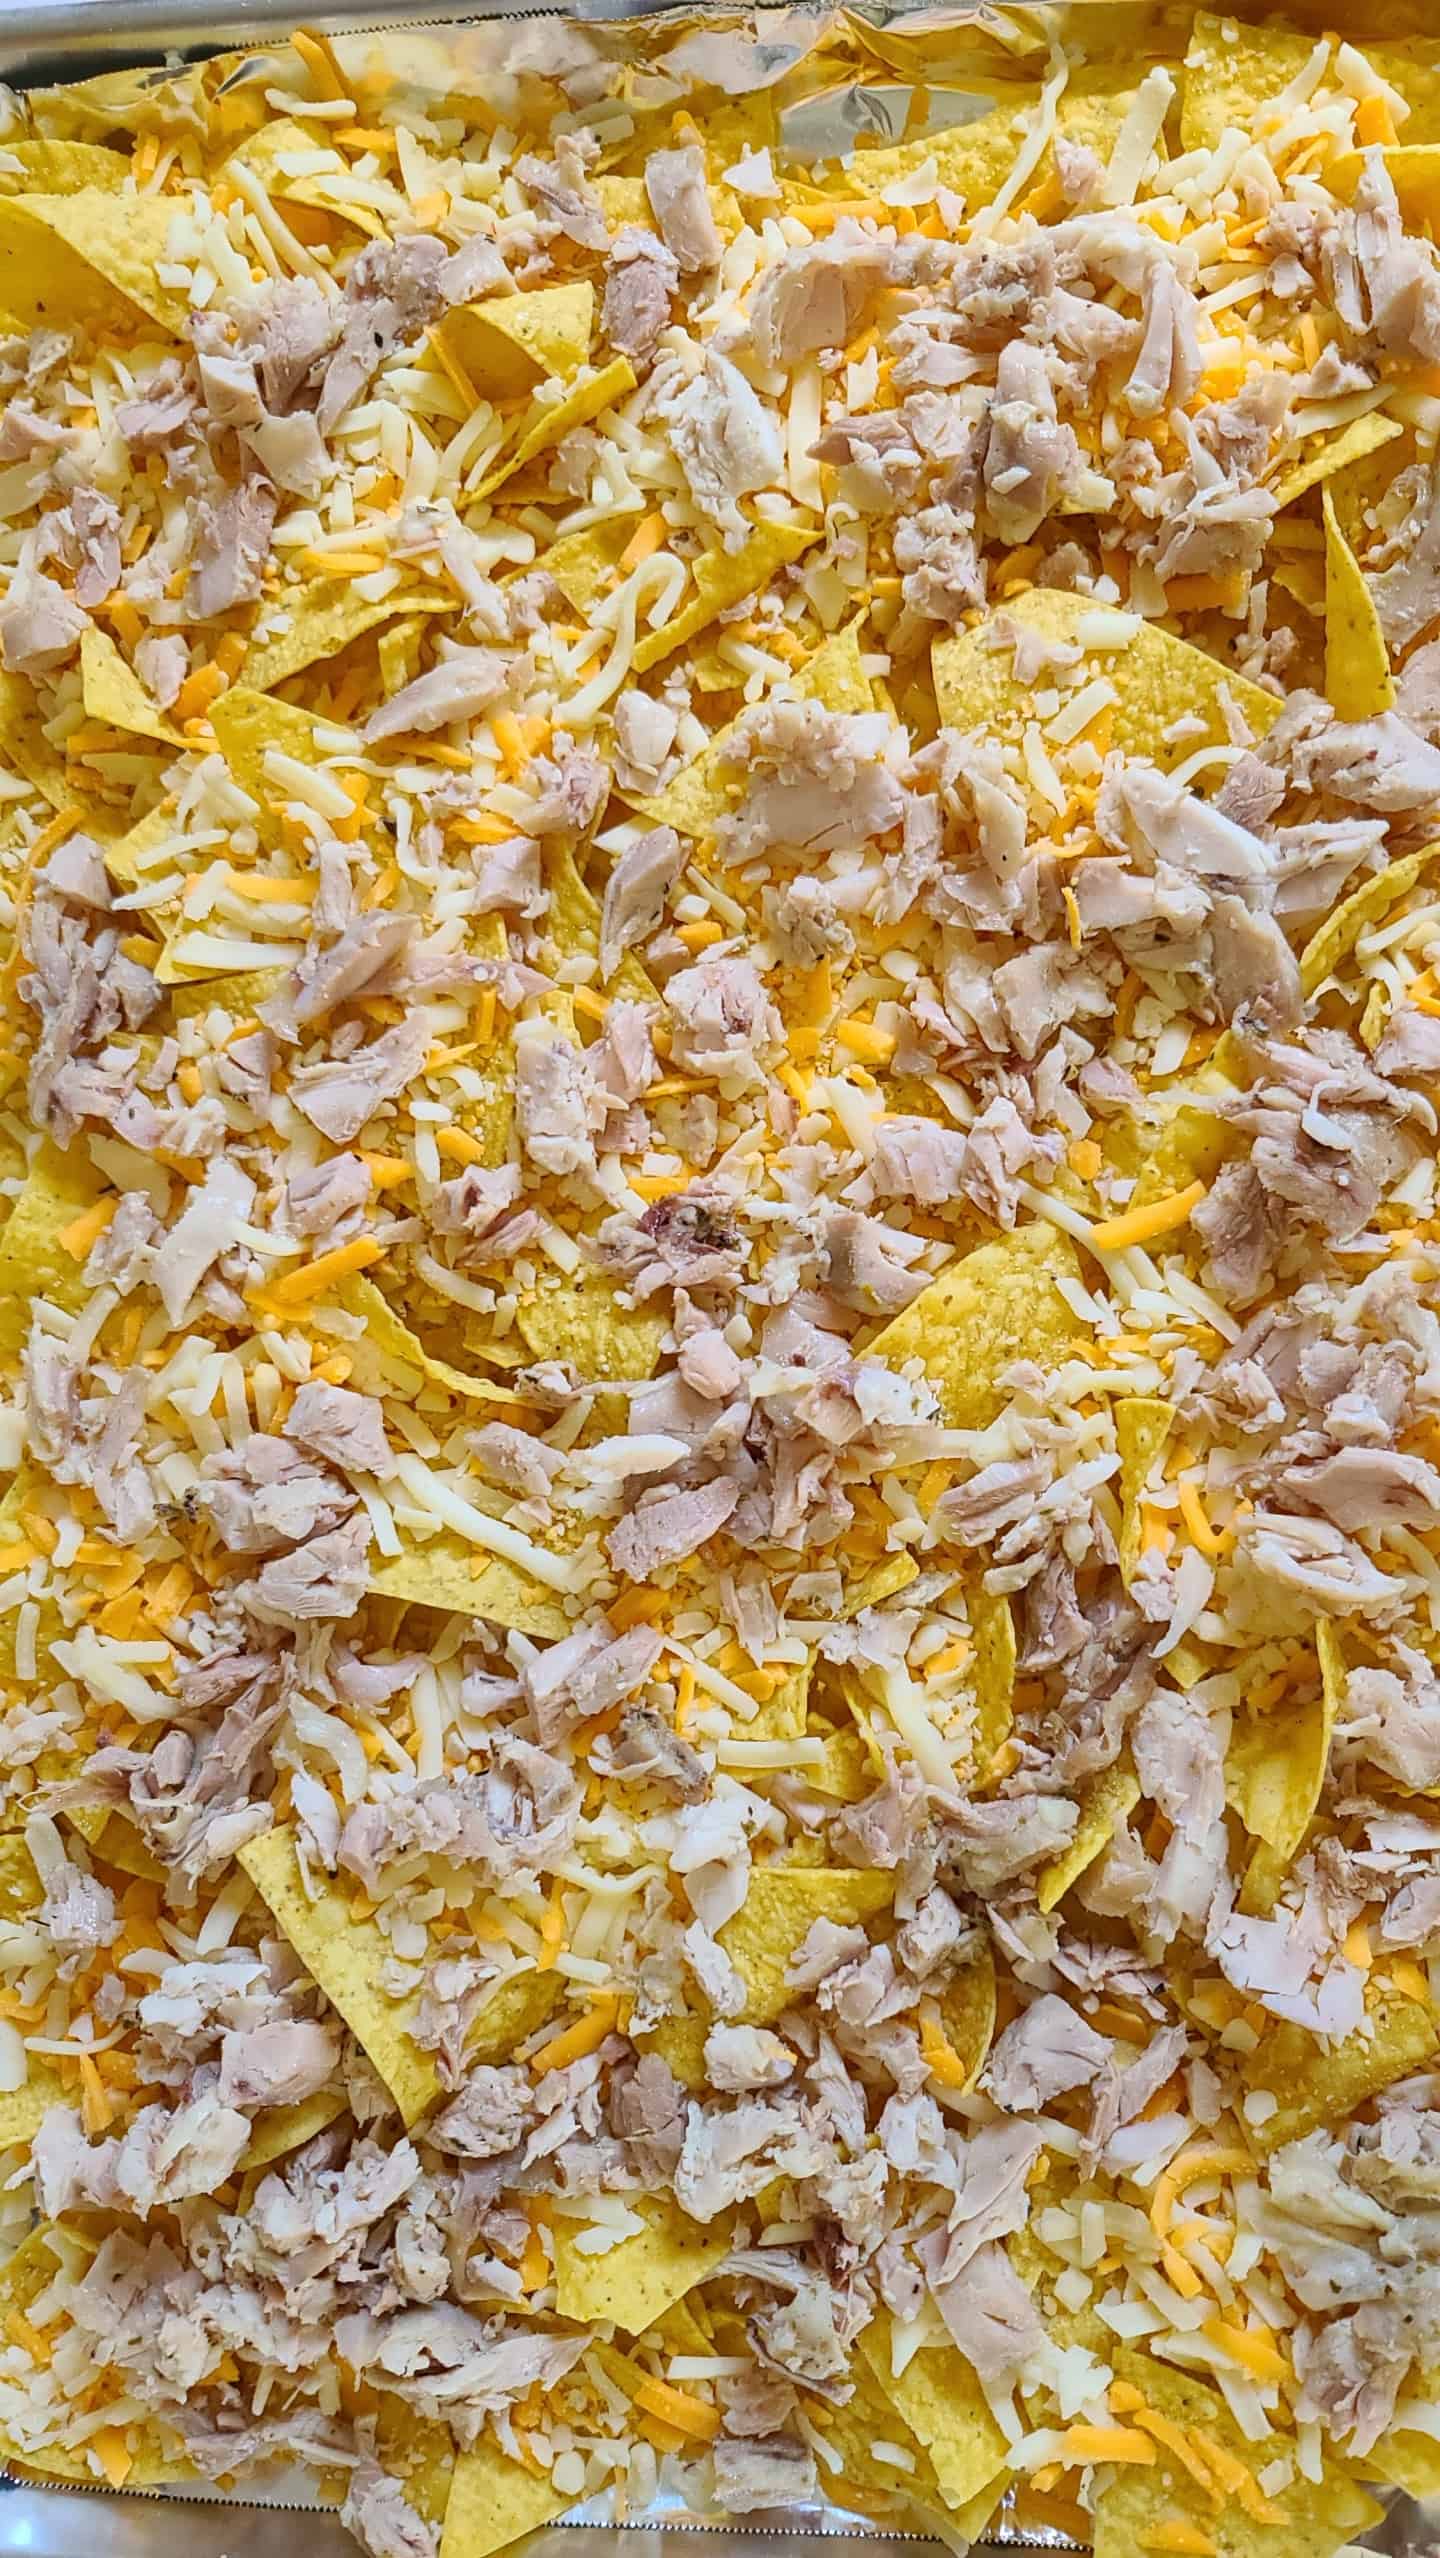 Layer of Tortillas with Chicken, Cheese